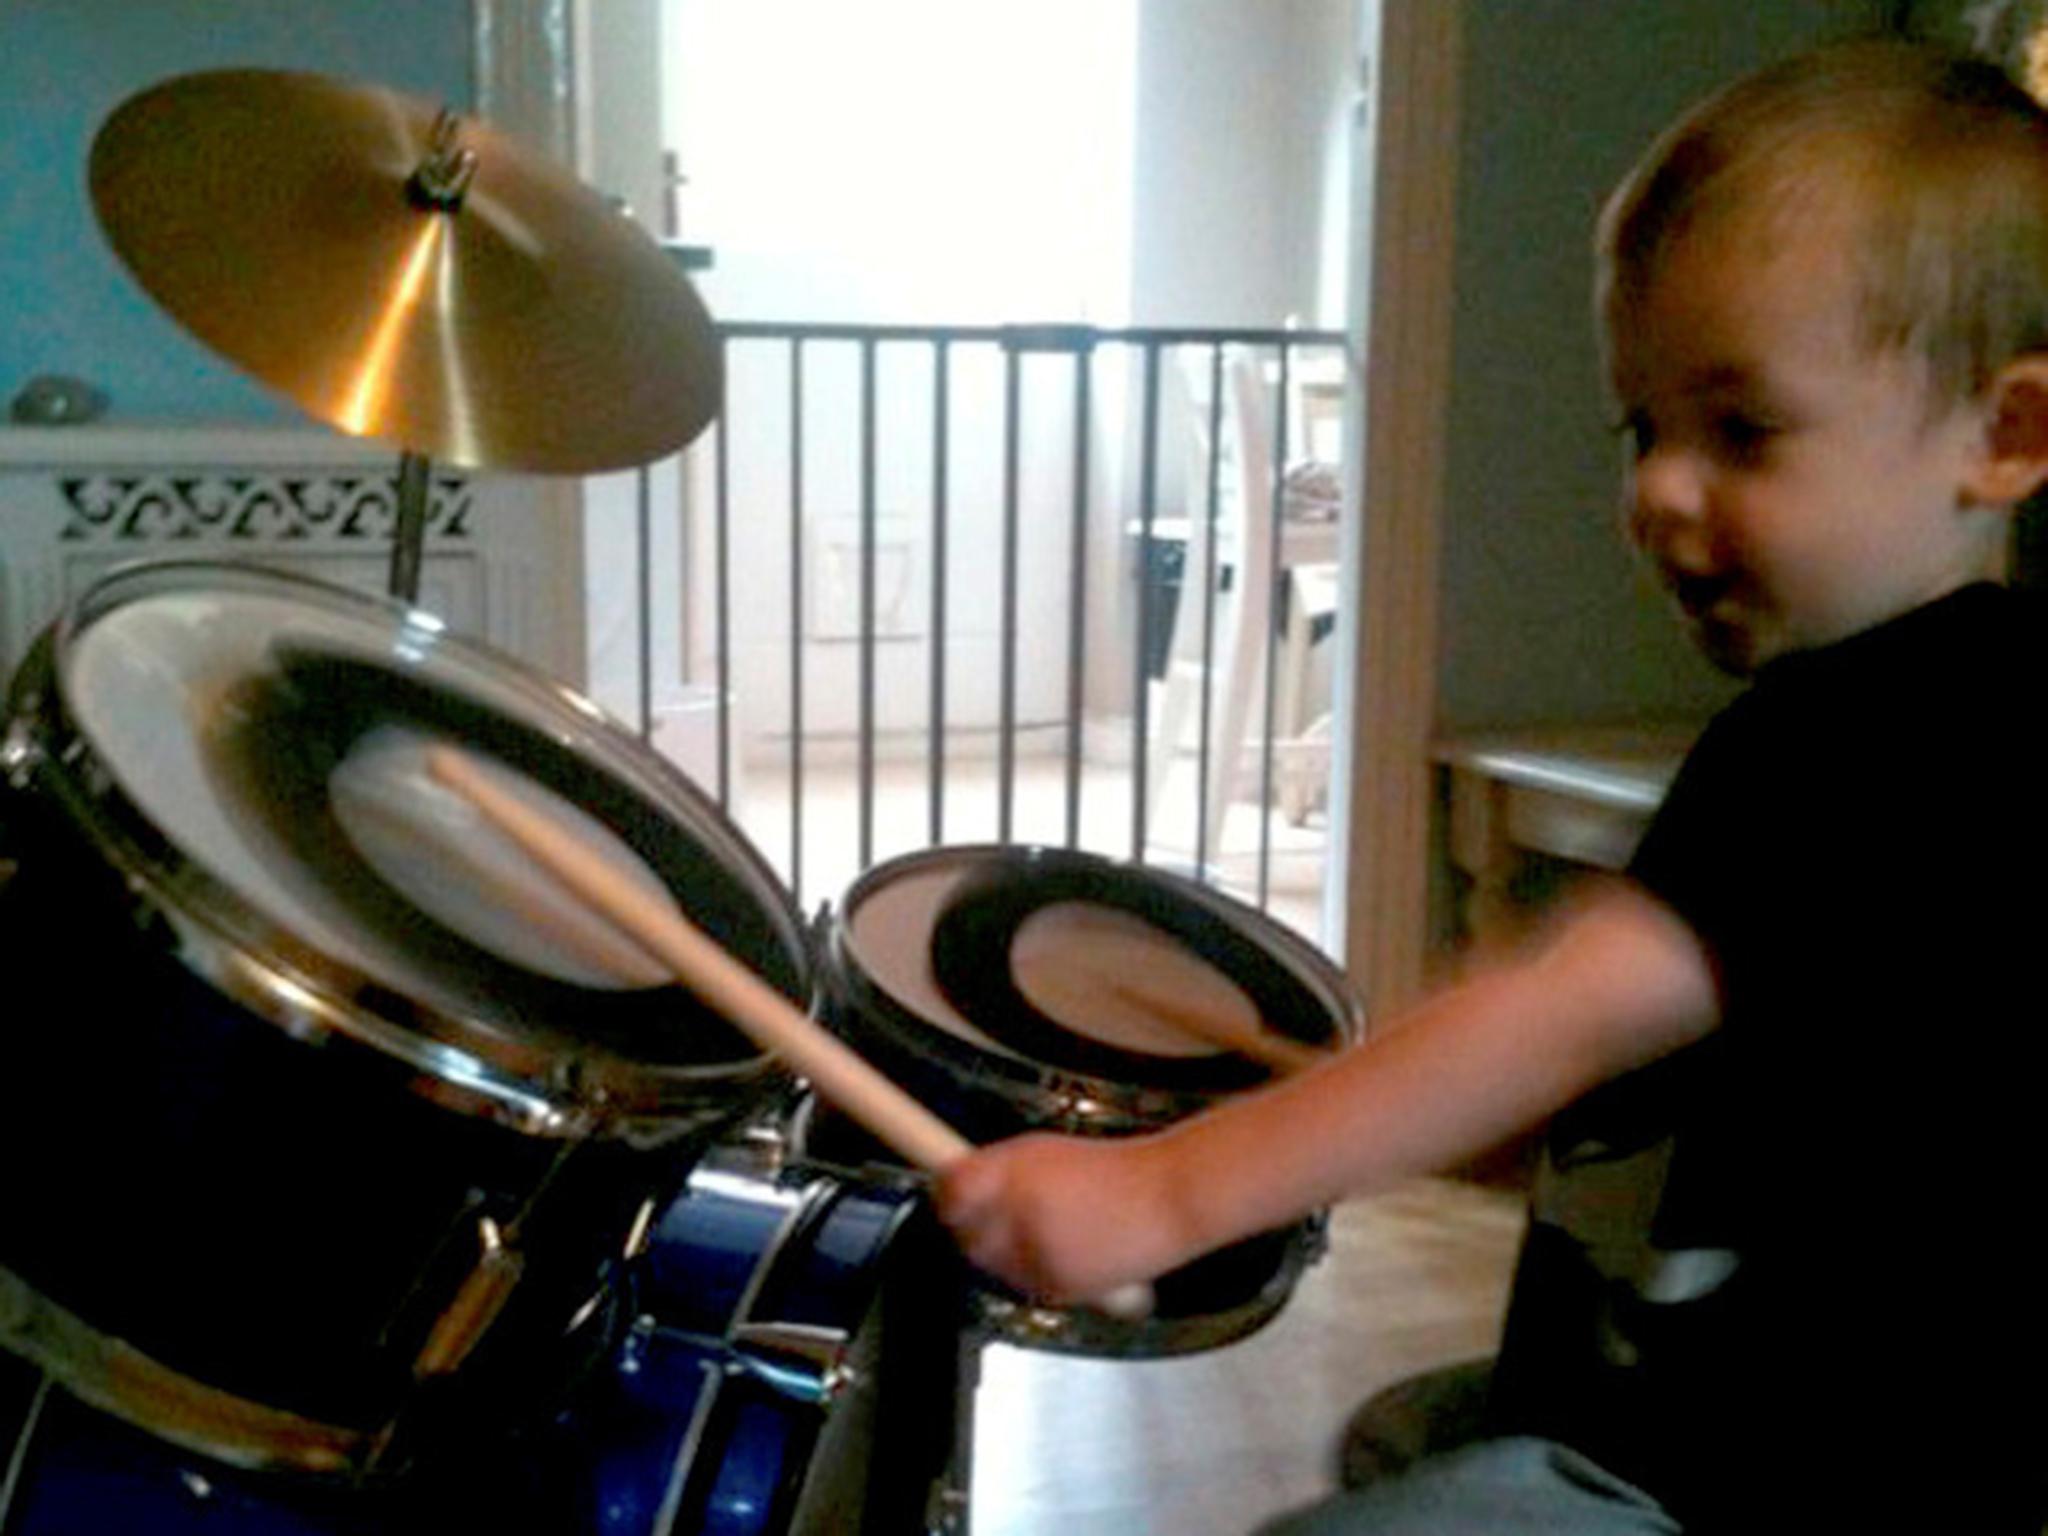 The young boy learnt to play the drums as a toddler Courtney family/SWNS